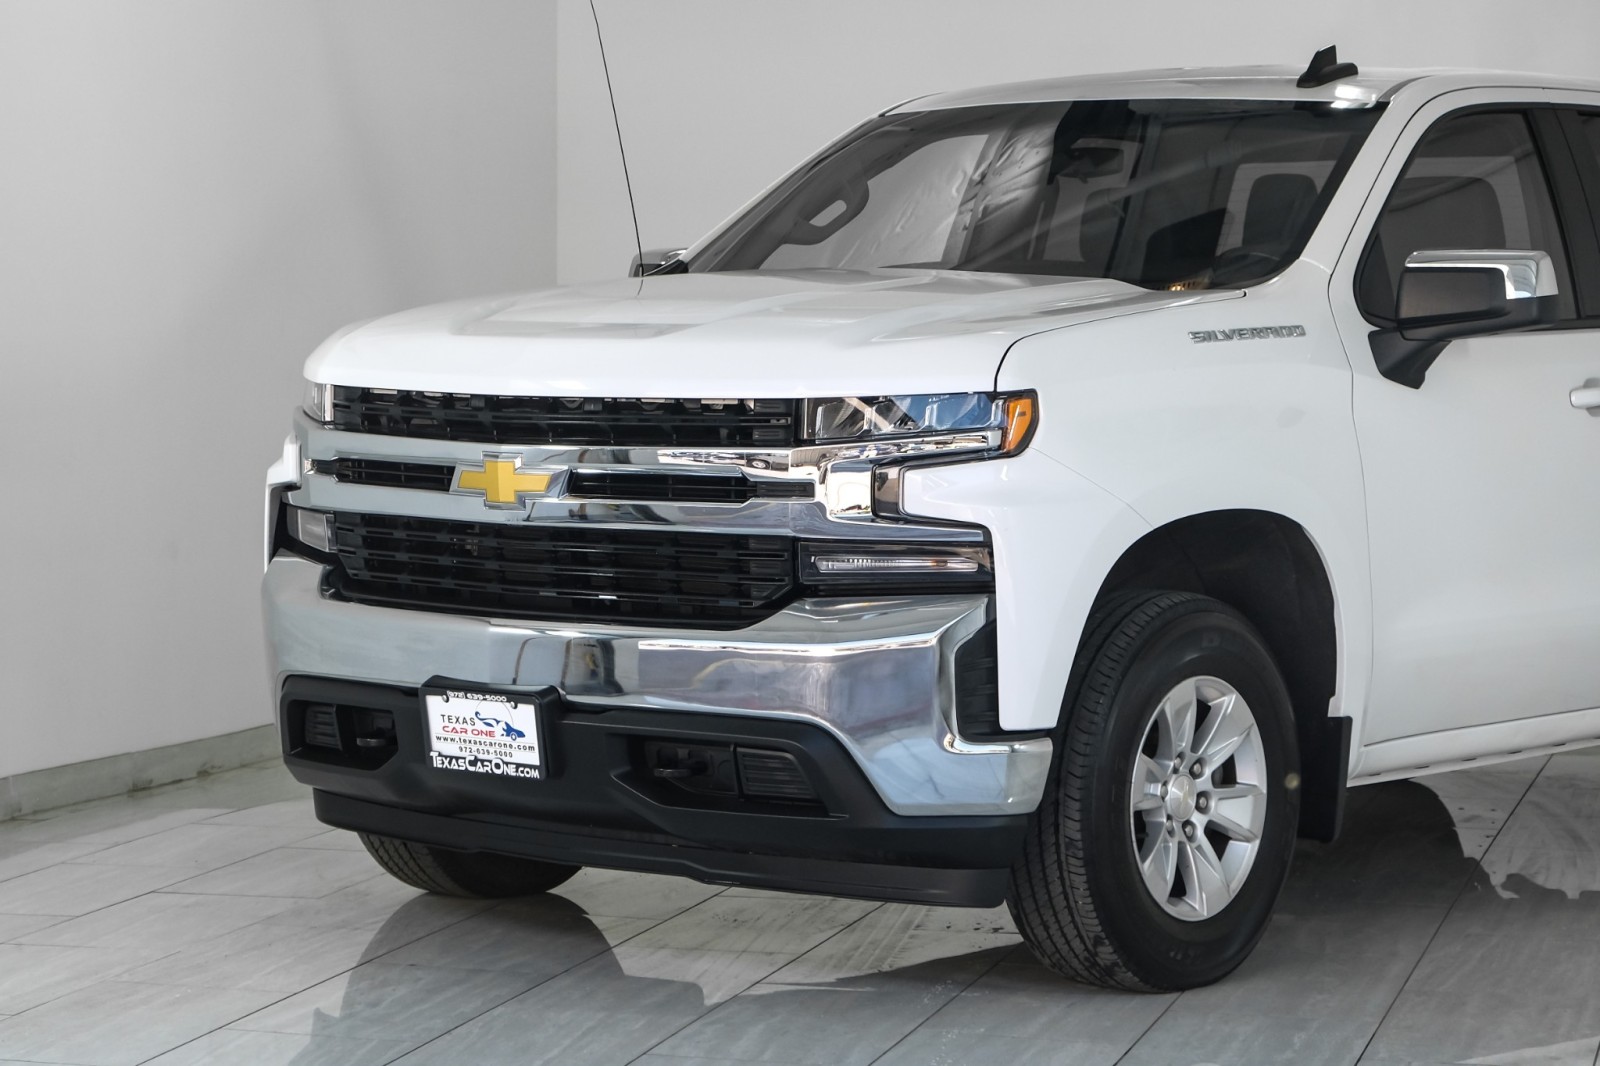 2019 Chevrolet Silverado 1500 LT DOUBLE CAB 4WD AUTOMATIC HEATED SEATS REAR CAME 7